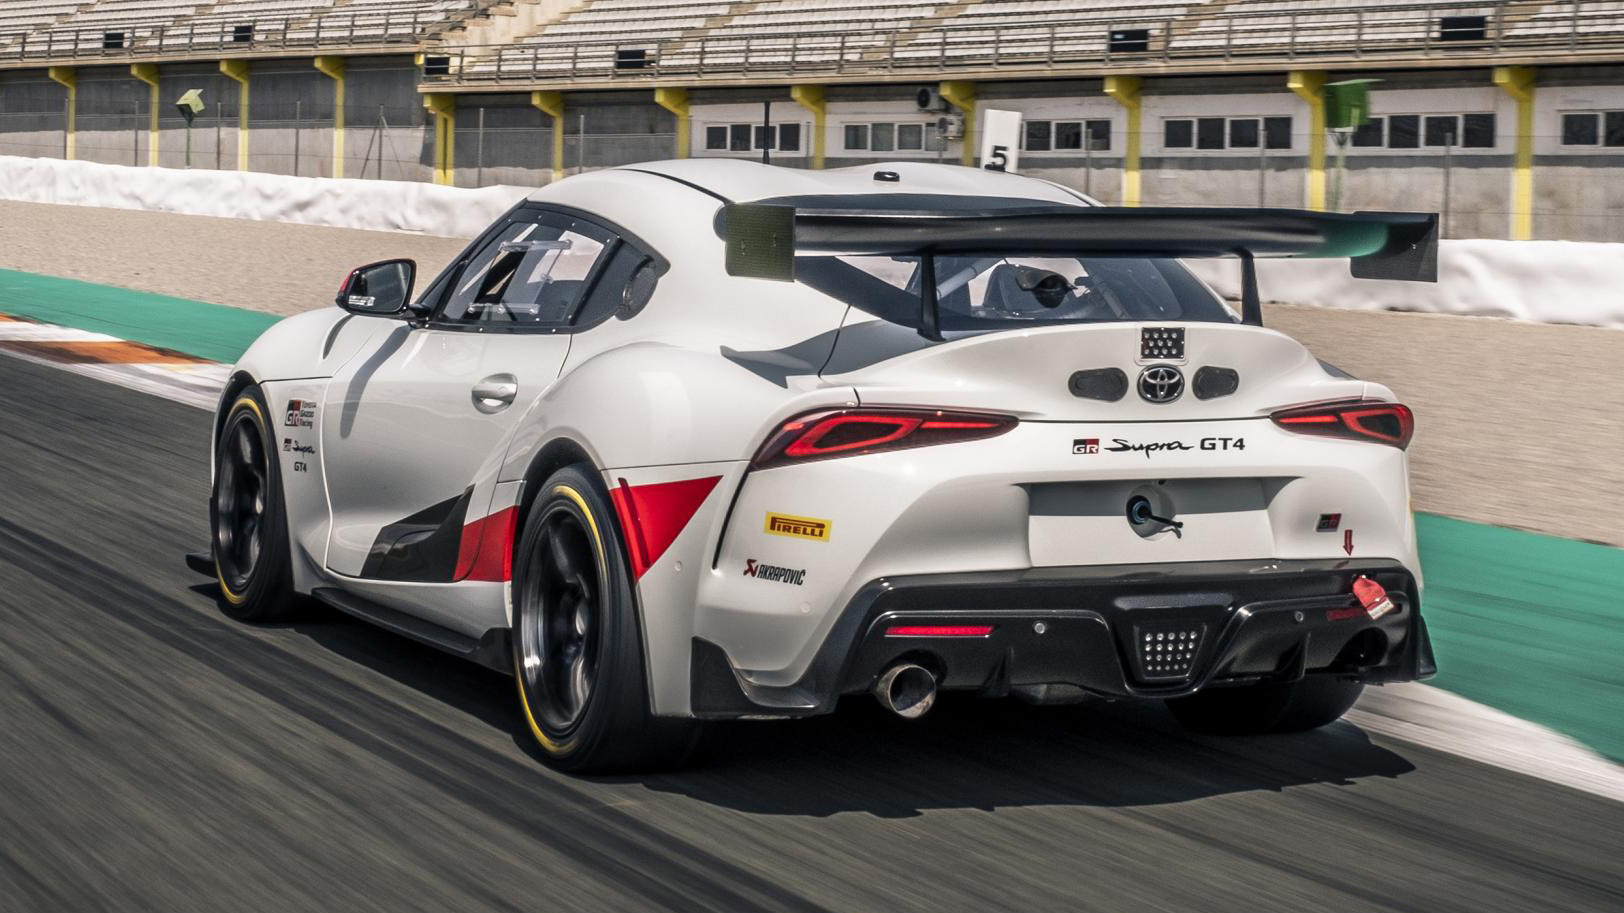 The Toyota Supra GT4 is for sale